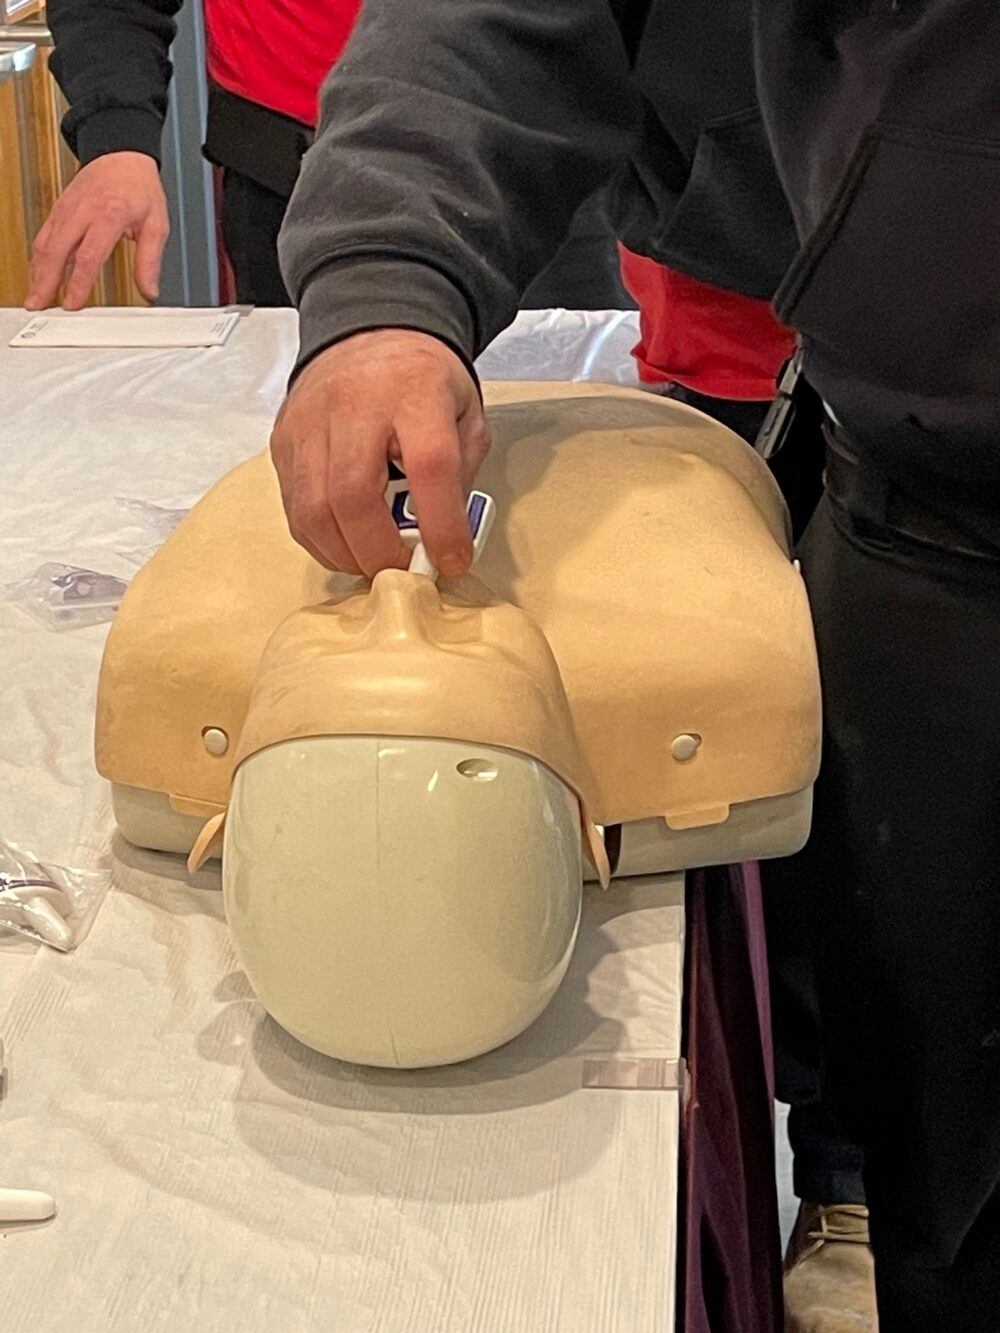 American Heart Association's Heartsaver CPR/AED/First Aid Course with Bobs Red Trucks